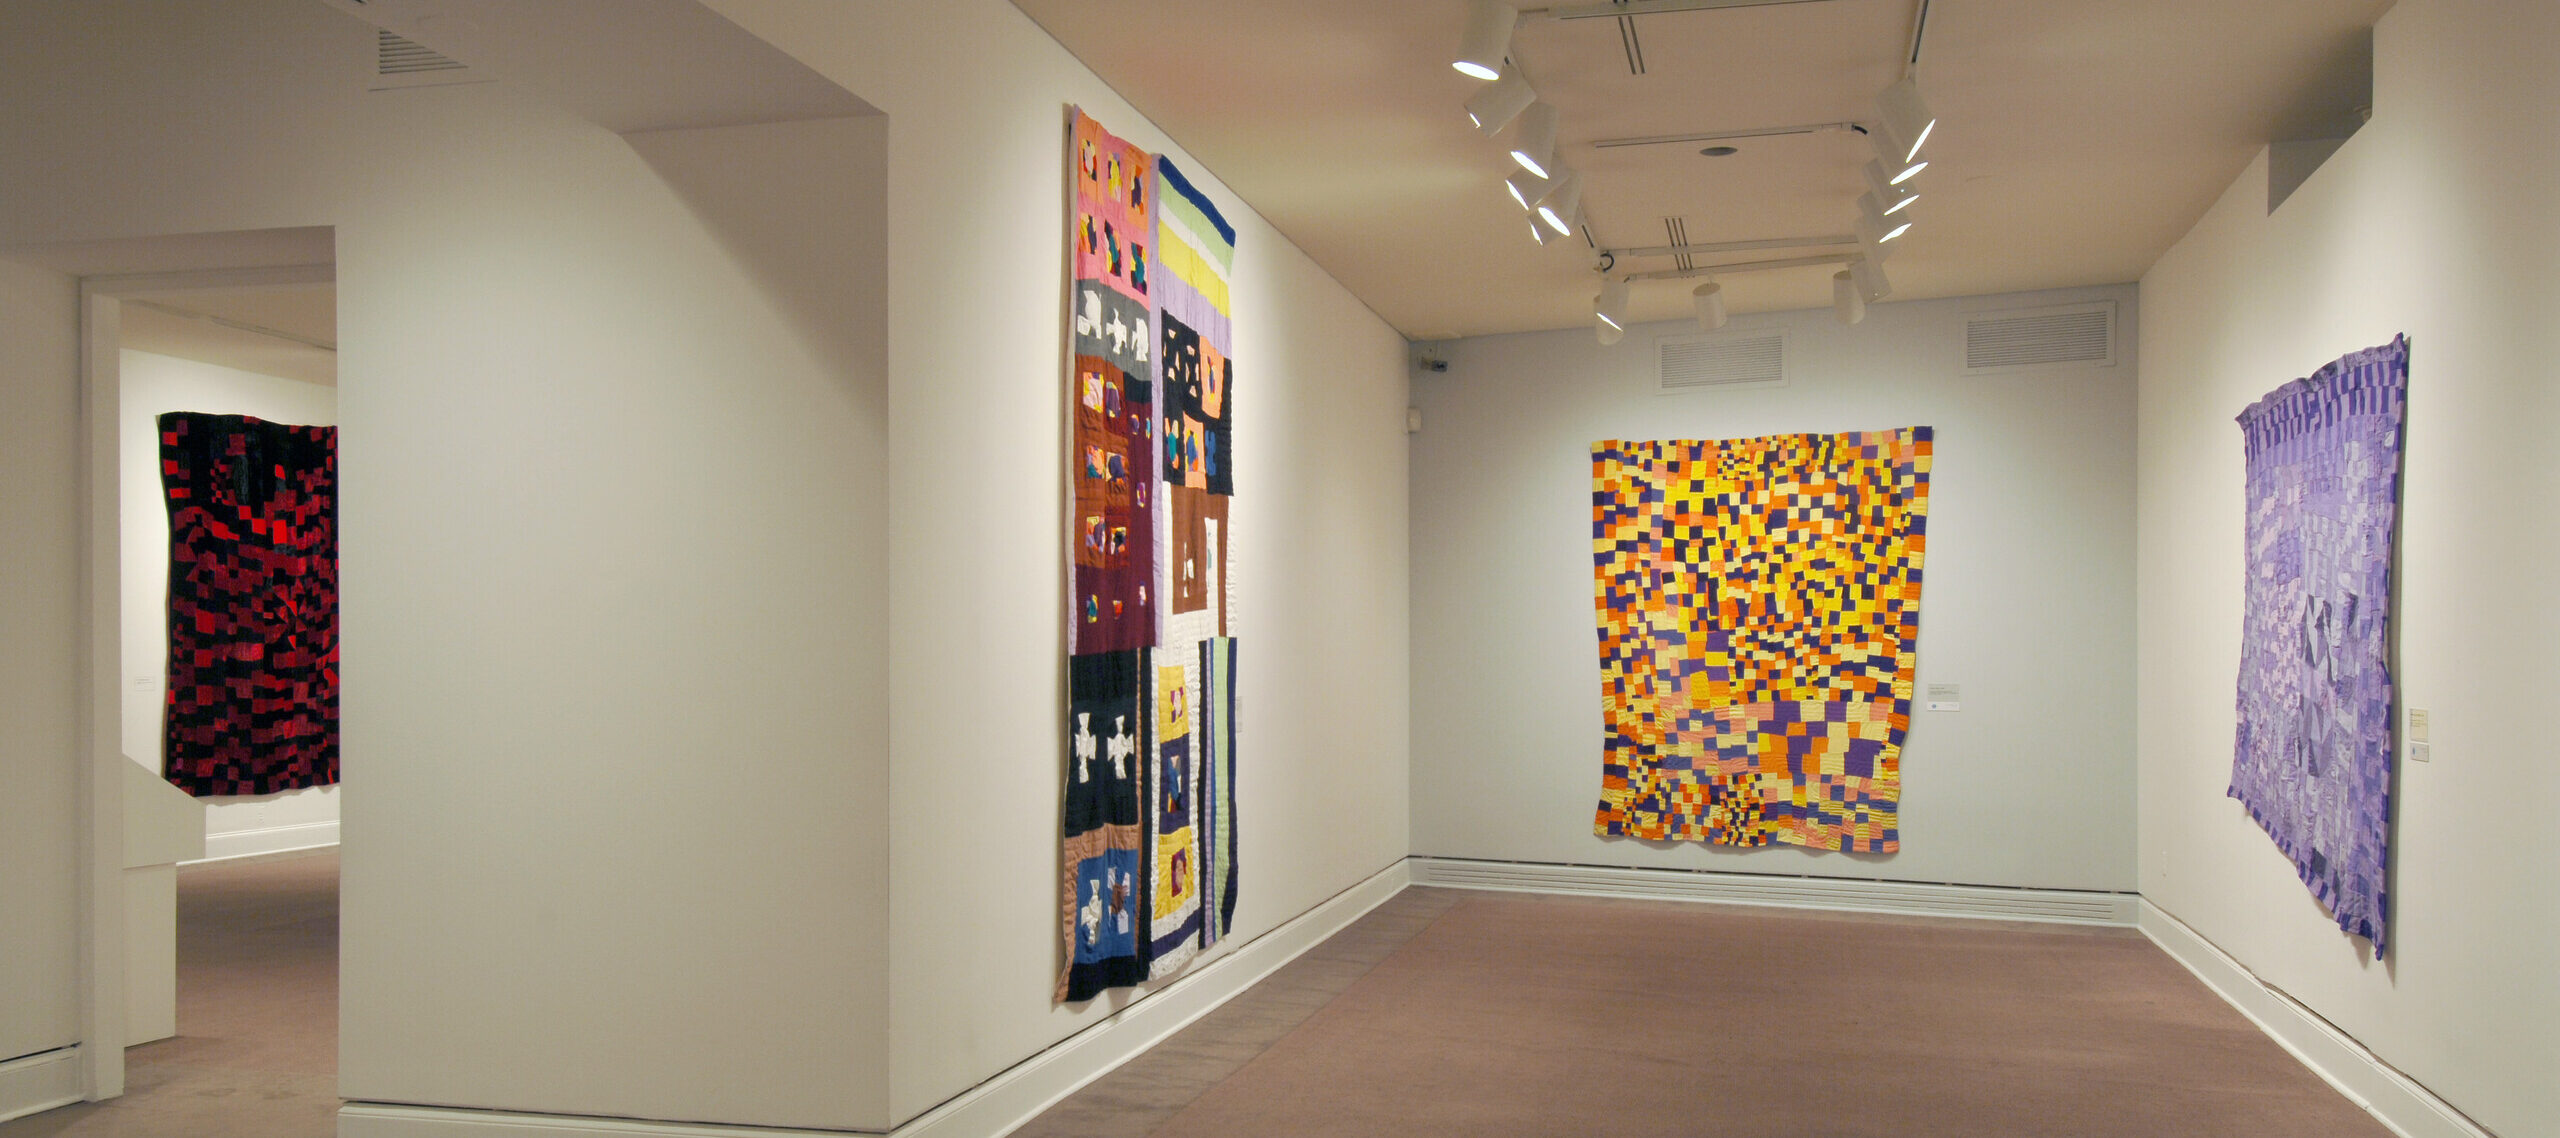 A view of a gallery space. Large quilts are hanging on each wall. They are colorful and almost take up the whole wall, creating a warm and cozy interior.